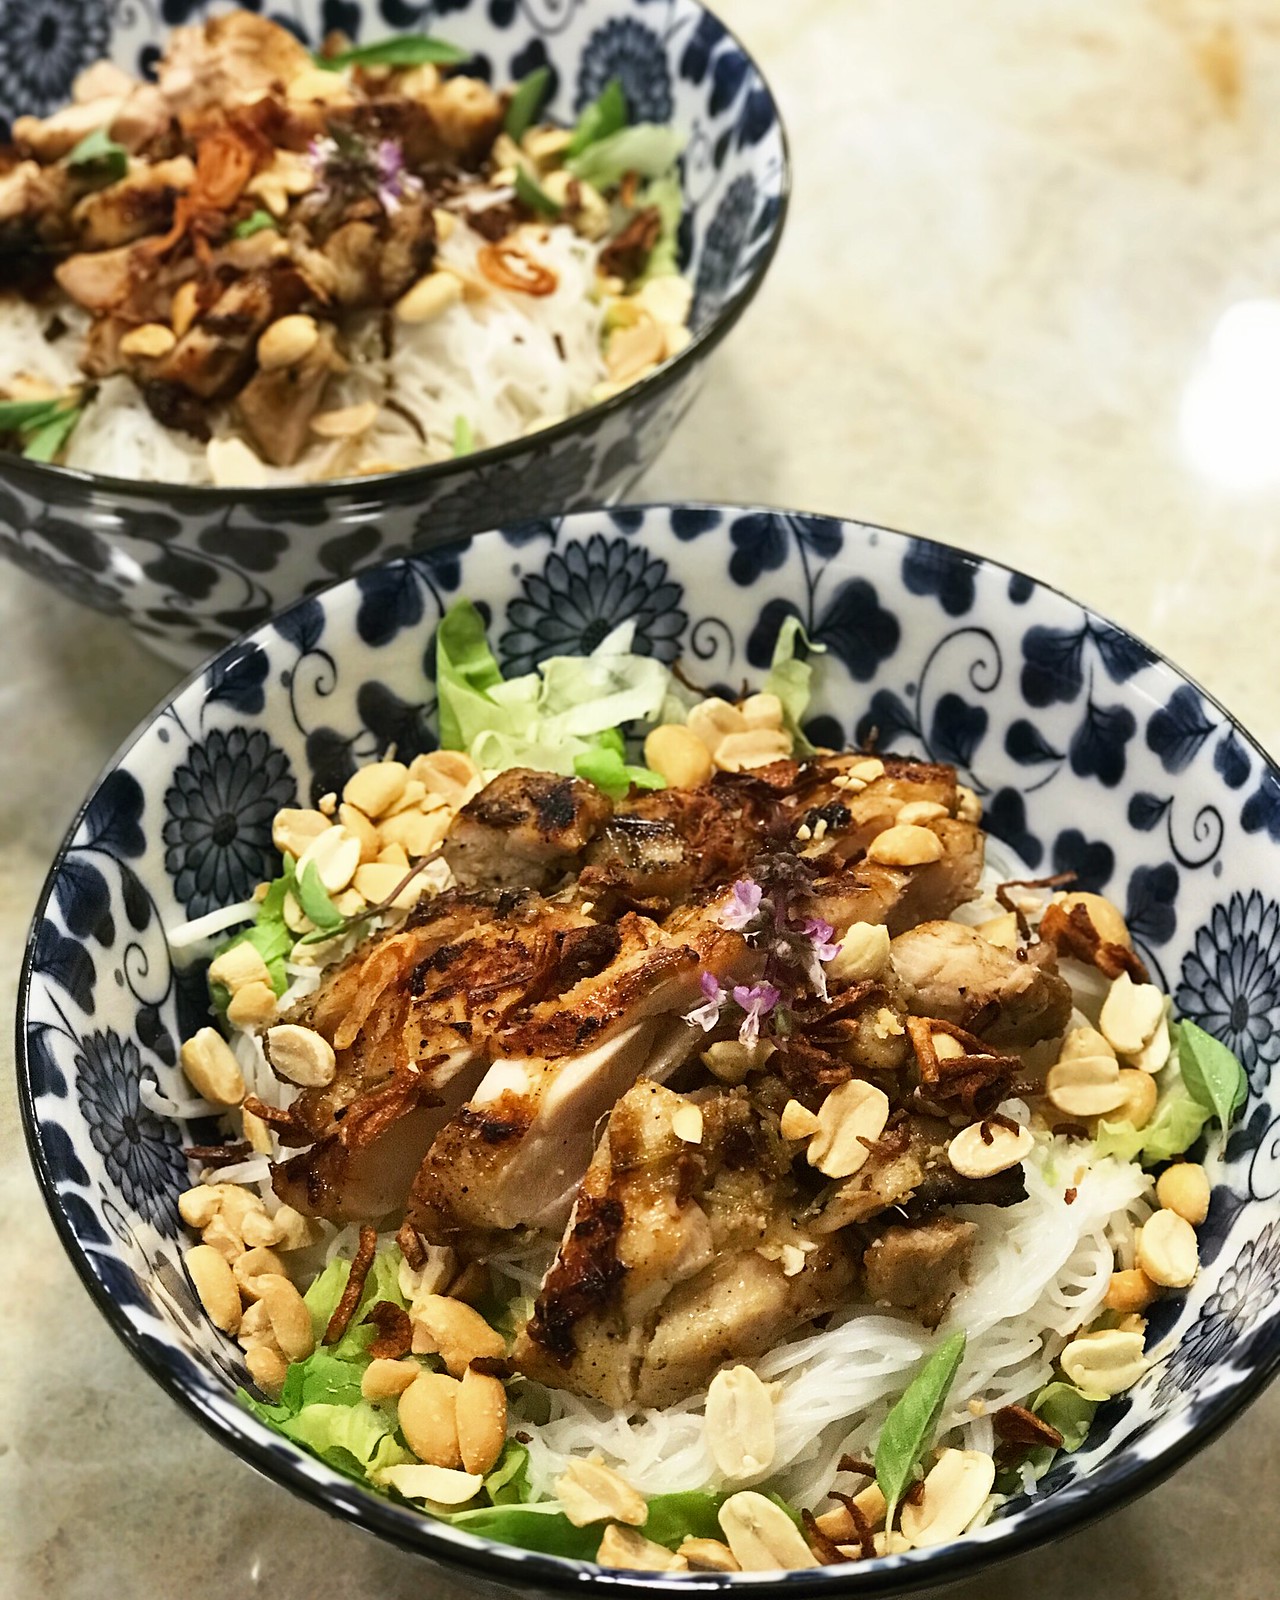 Lemongrass chicken with rice noodles